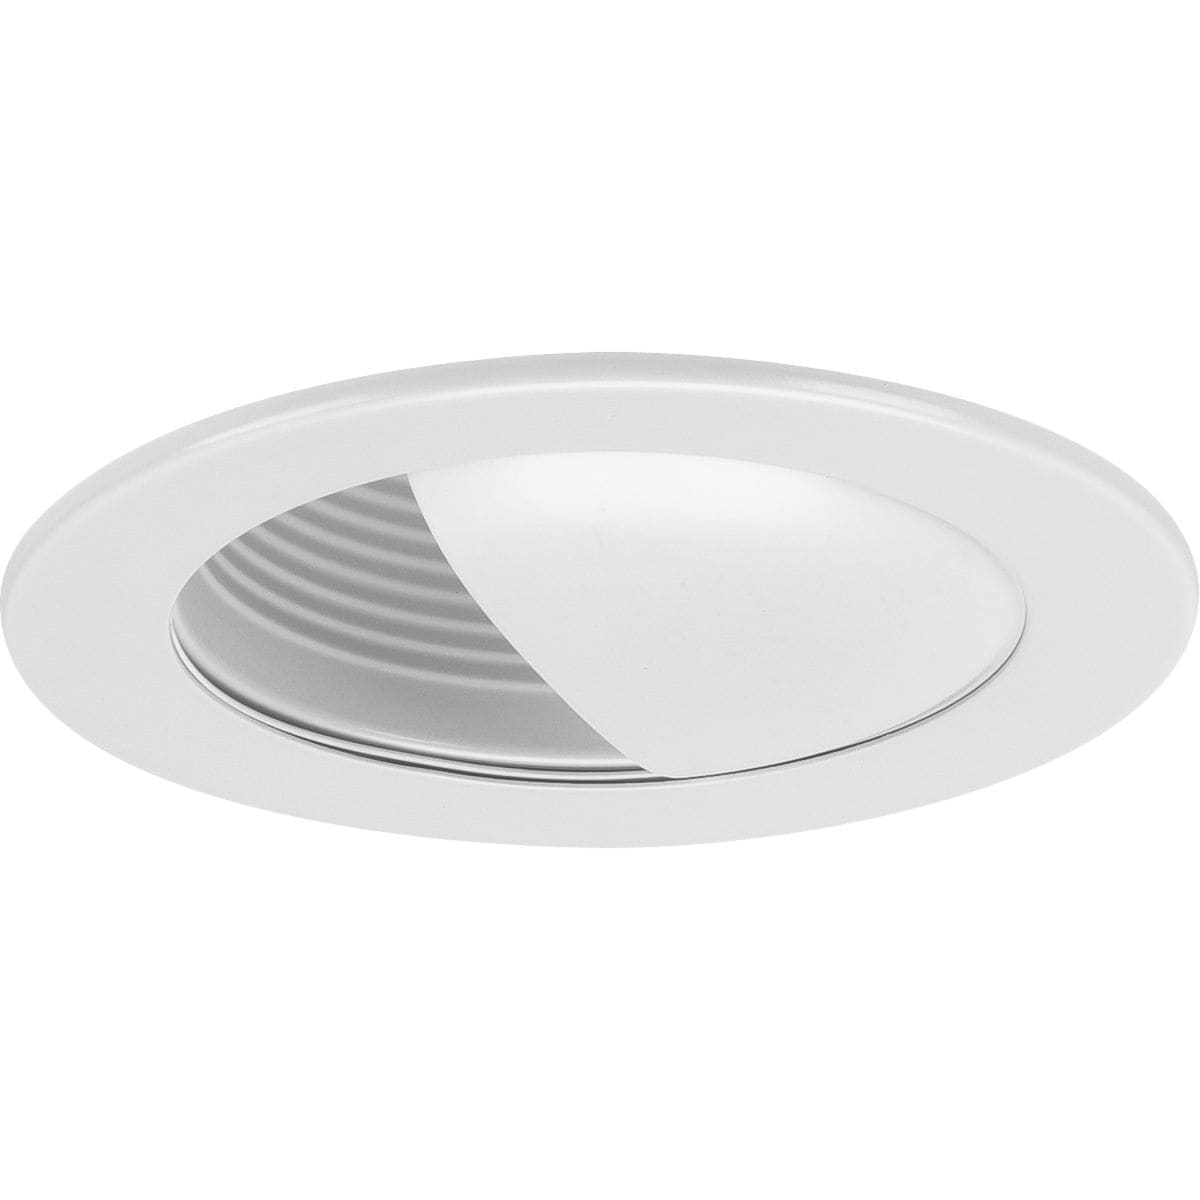 4" INCH RECESSED CAN LIGHT SATIN NICKEL BAFFLE TRIM WITH WHITE RING 120V 